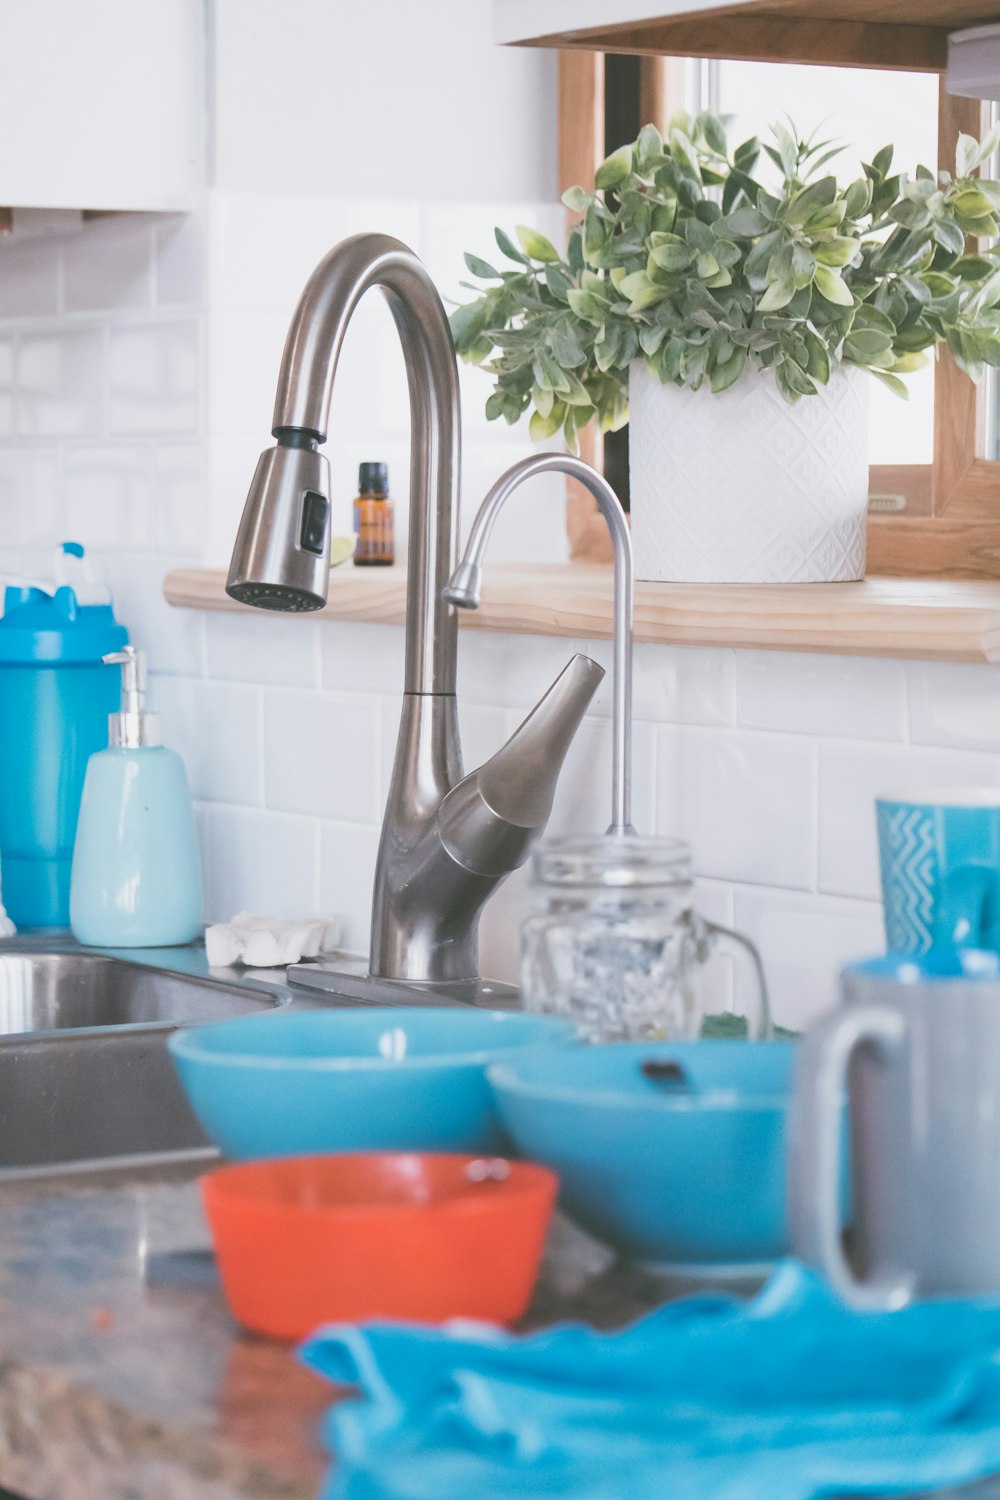 stainless steel faucet near blue plastic bowl